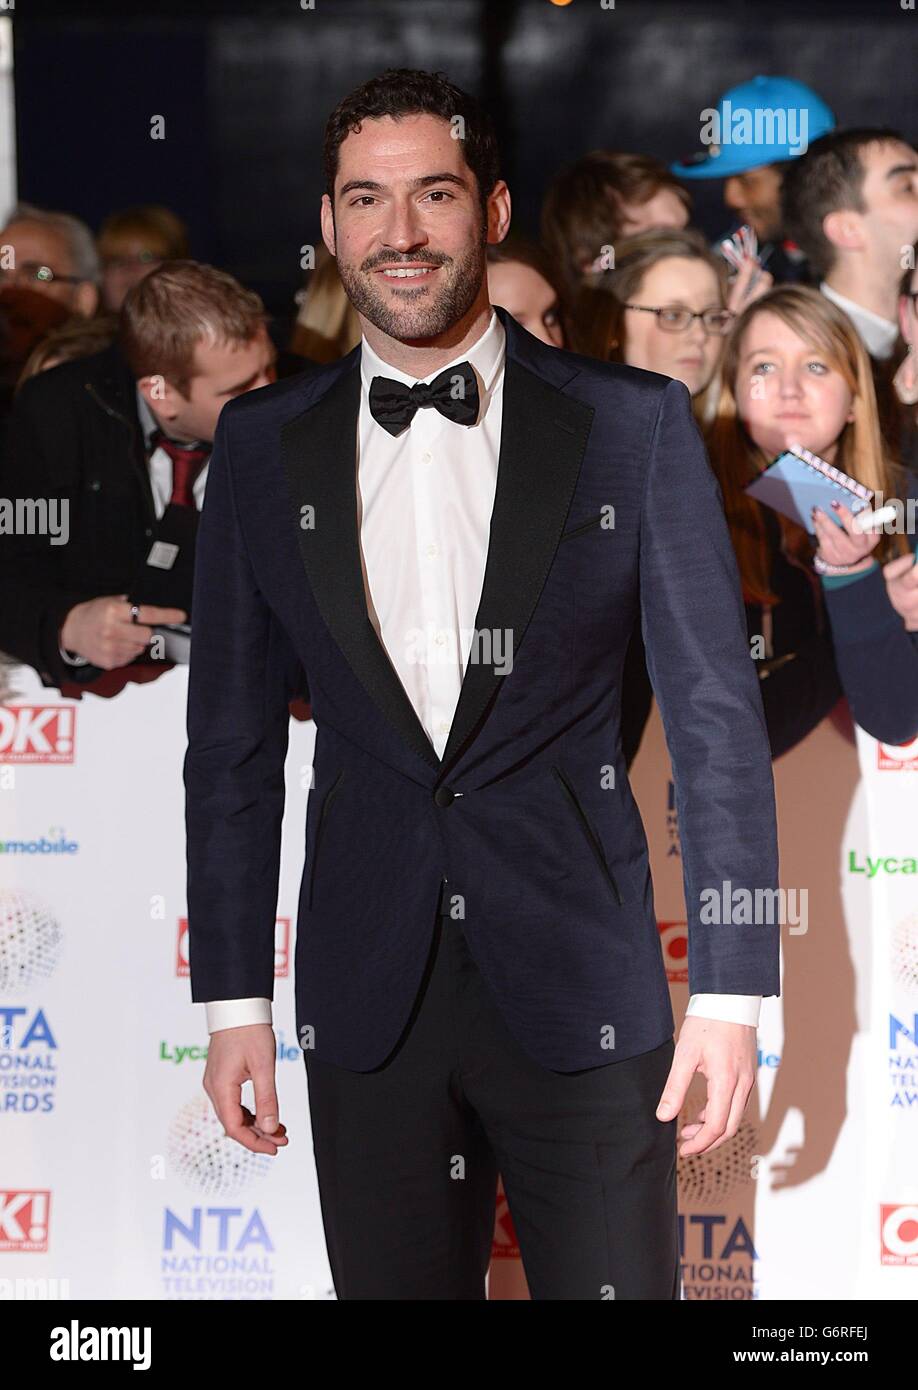 National Television Awards 2014 - Arrivals - London. Tom Ellis arriving for the 2014 National Television Awards at the O2 Arena, London. Stock Photo